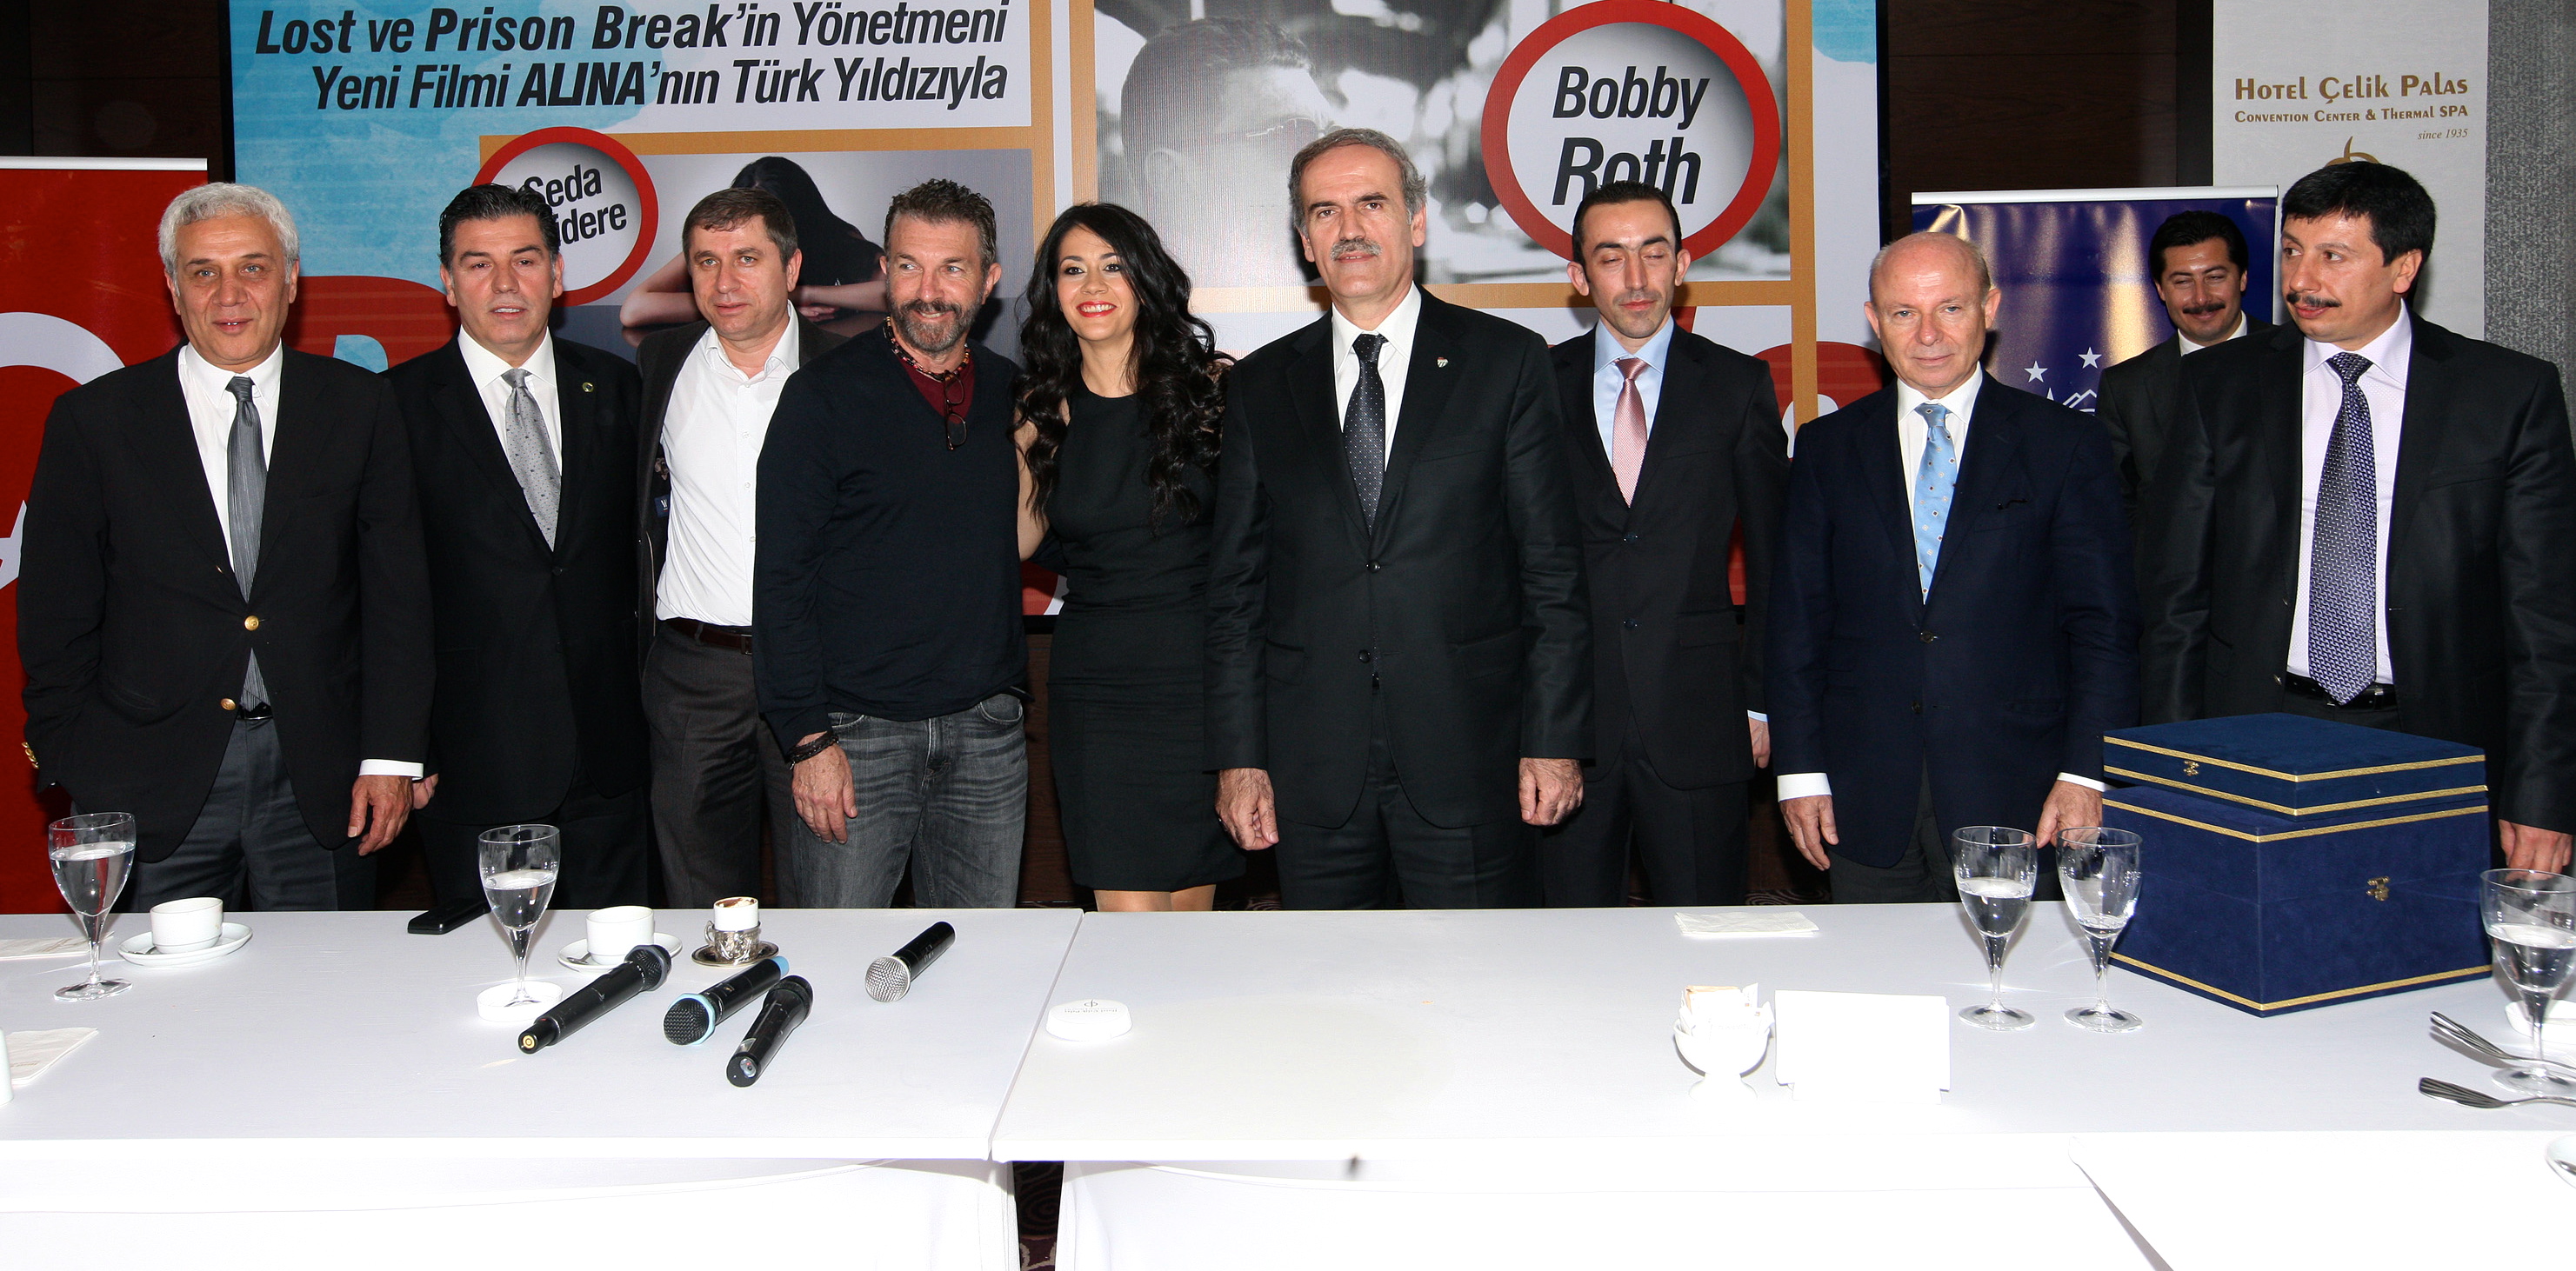 Seda Egridere and Bobby Roth attend a press conference for Alina, The Turkish Assassin.